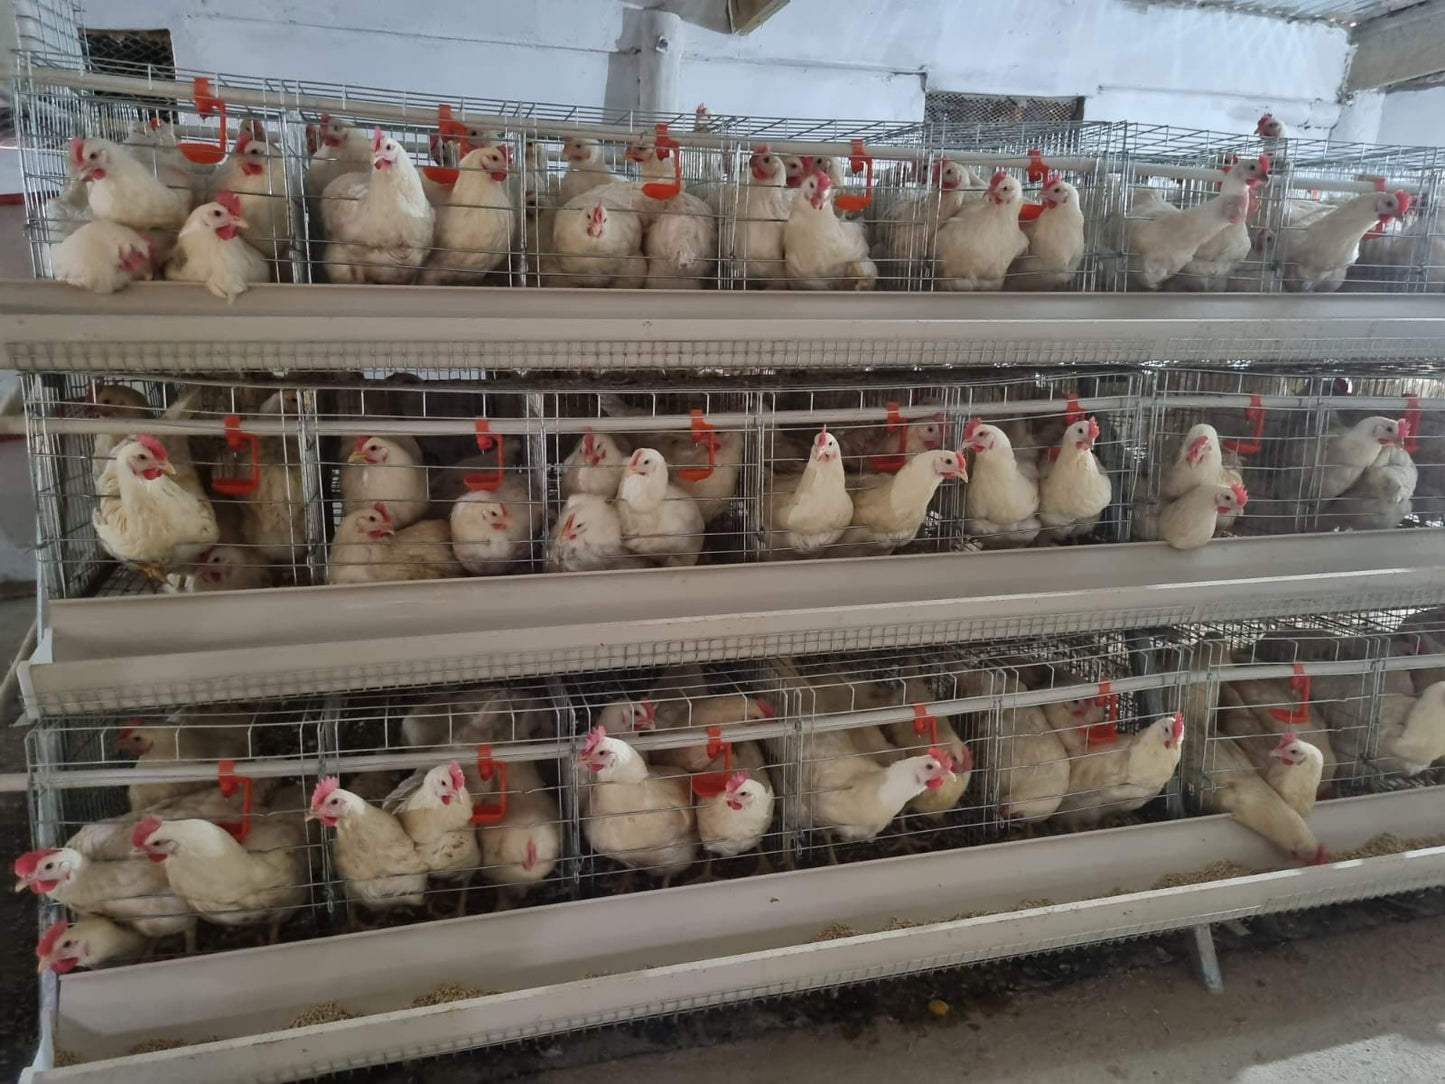 360 Bird Egg Laying Cage - Elite Poultry Equipment